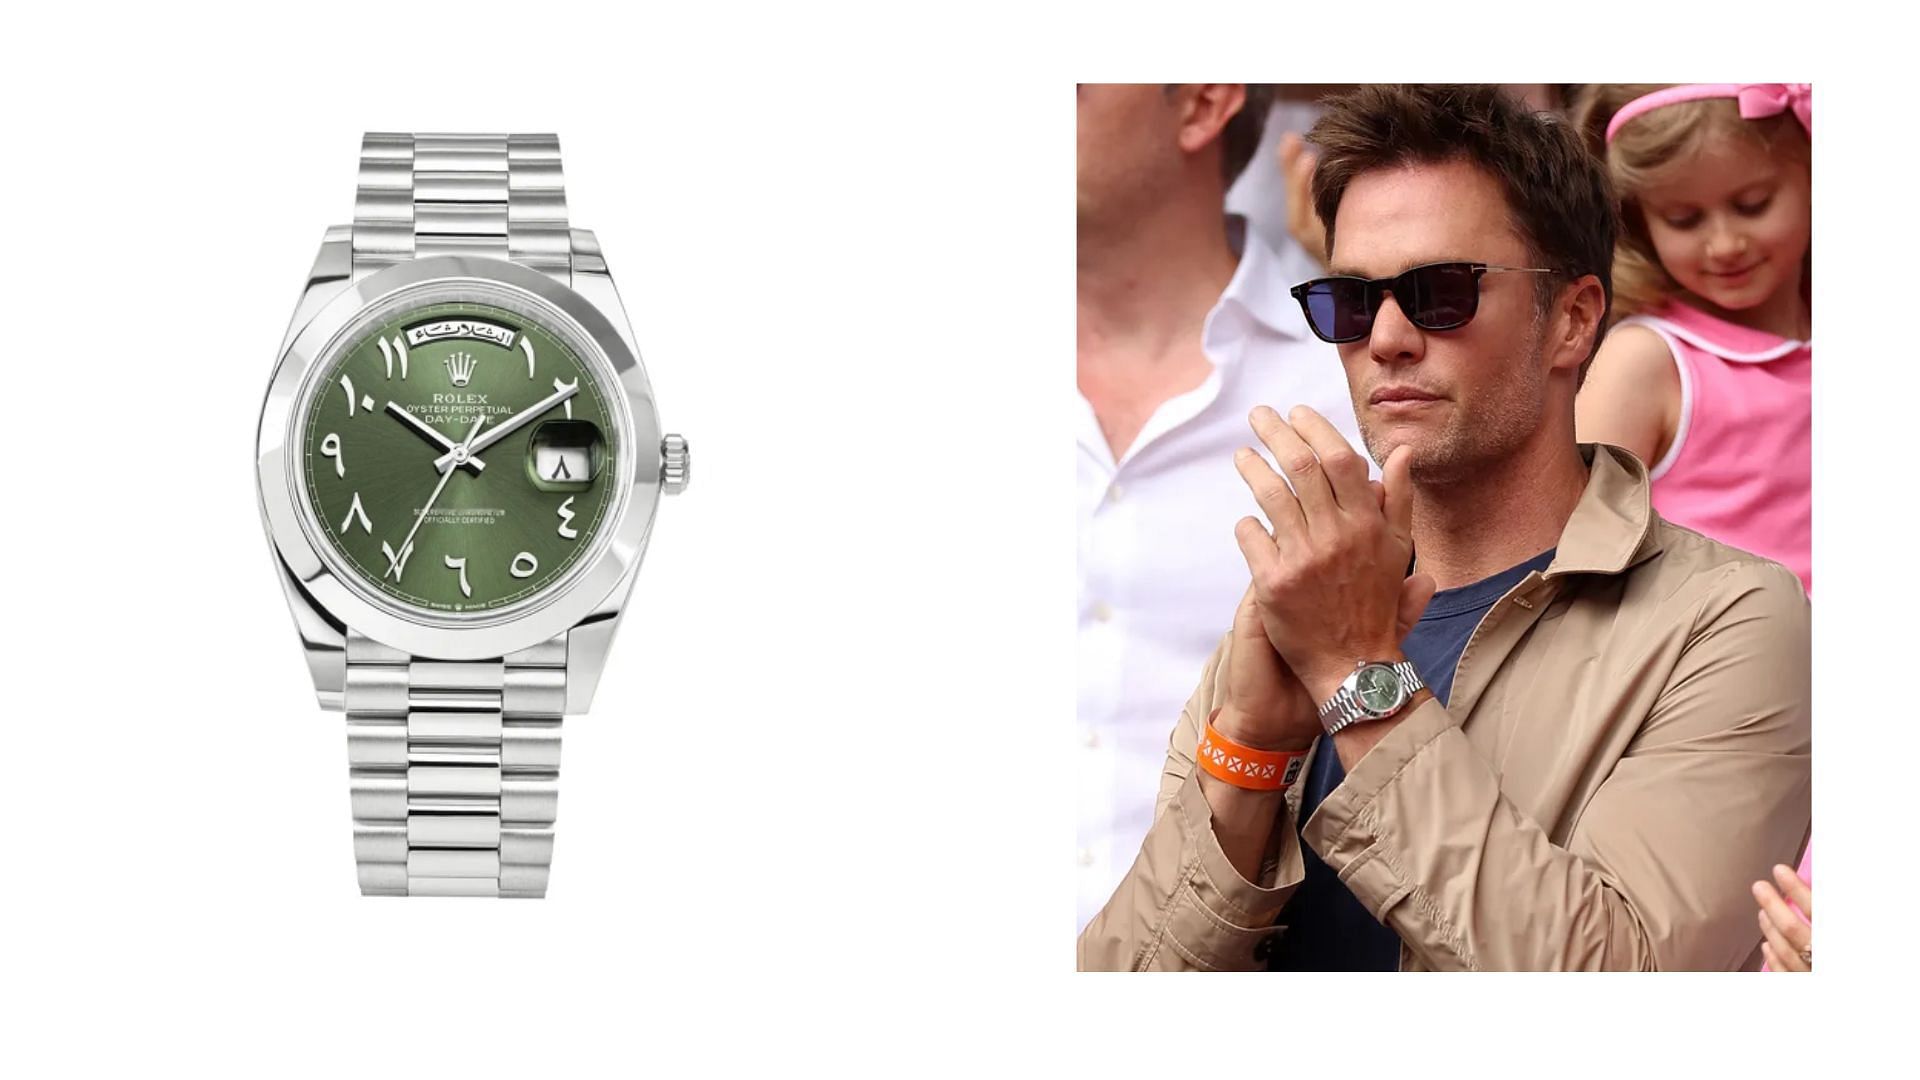 Tom Brady sporting a Rolex Day-Date (Image Credit: Getty Images).